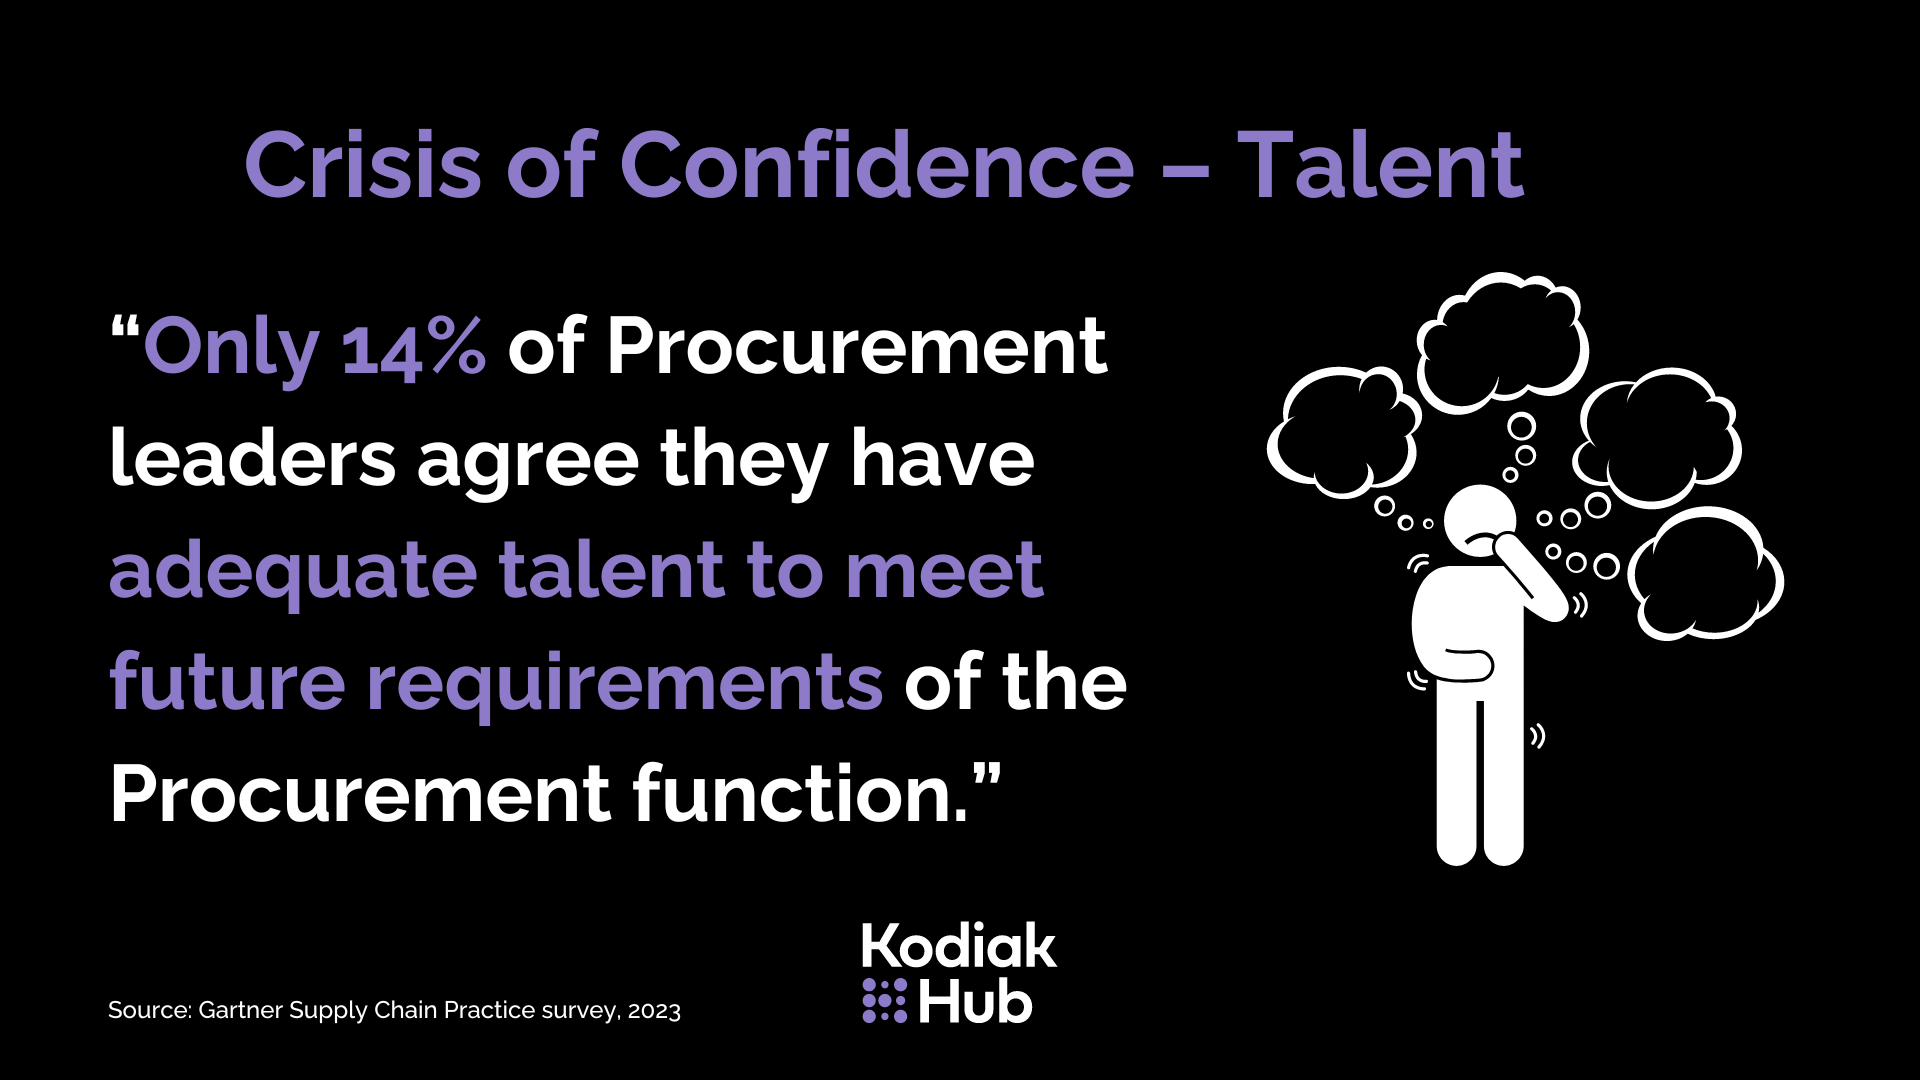 Crisis of confidence - talent